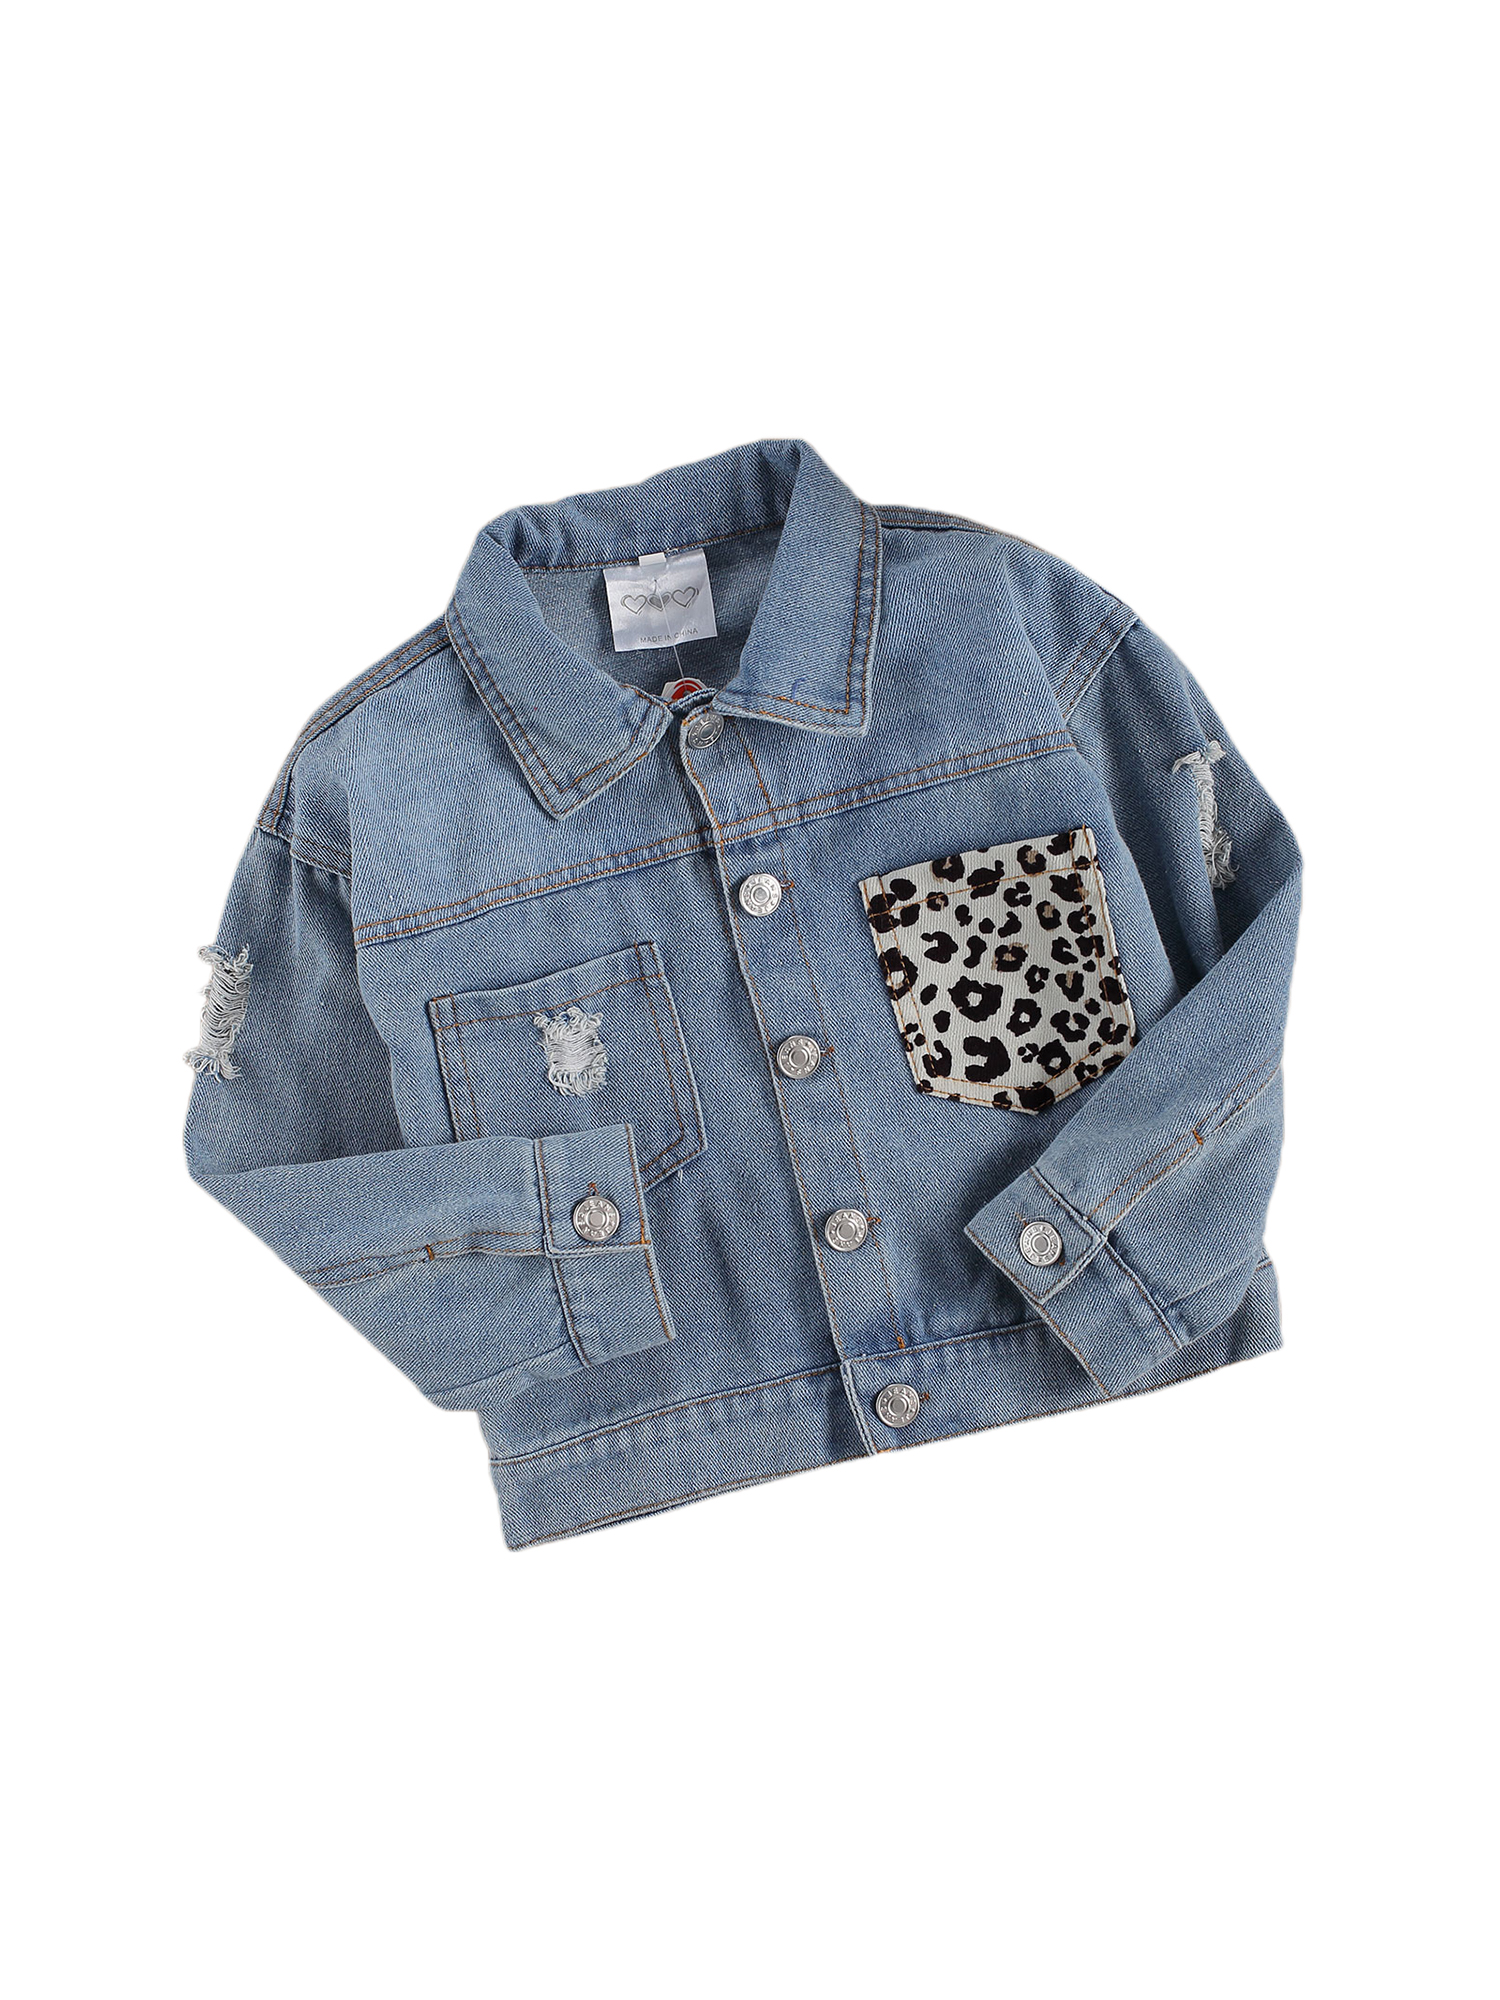 Canrulo Toddler Baby Girls Denim Jacket Leopard/Sequined Print Long Sleeve Single Breasted Coats Fall Winter Clothes Denim Leopard 1-2 Years - image 5 of 7